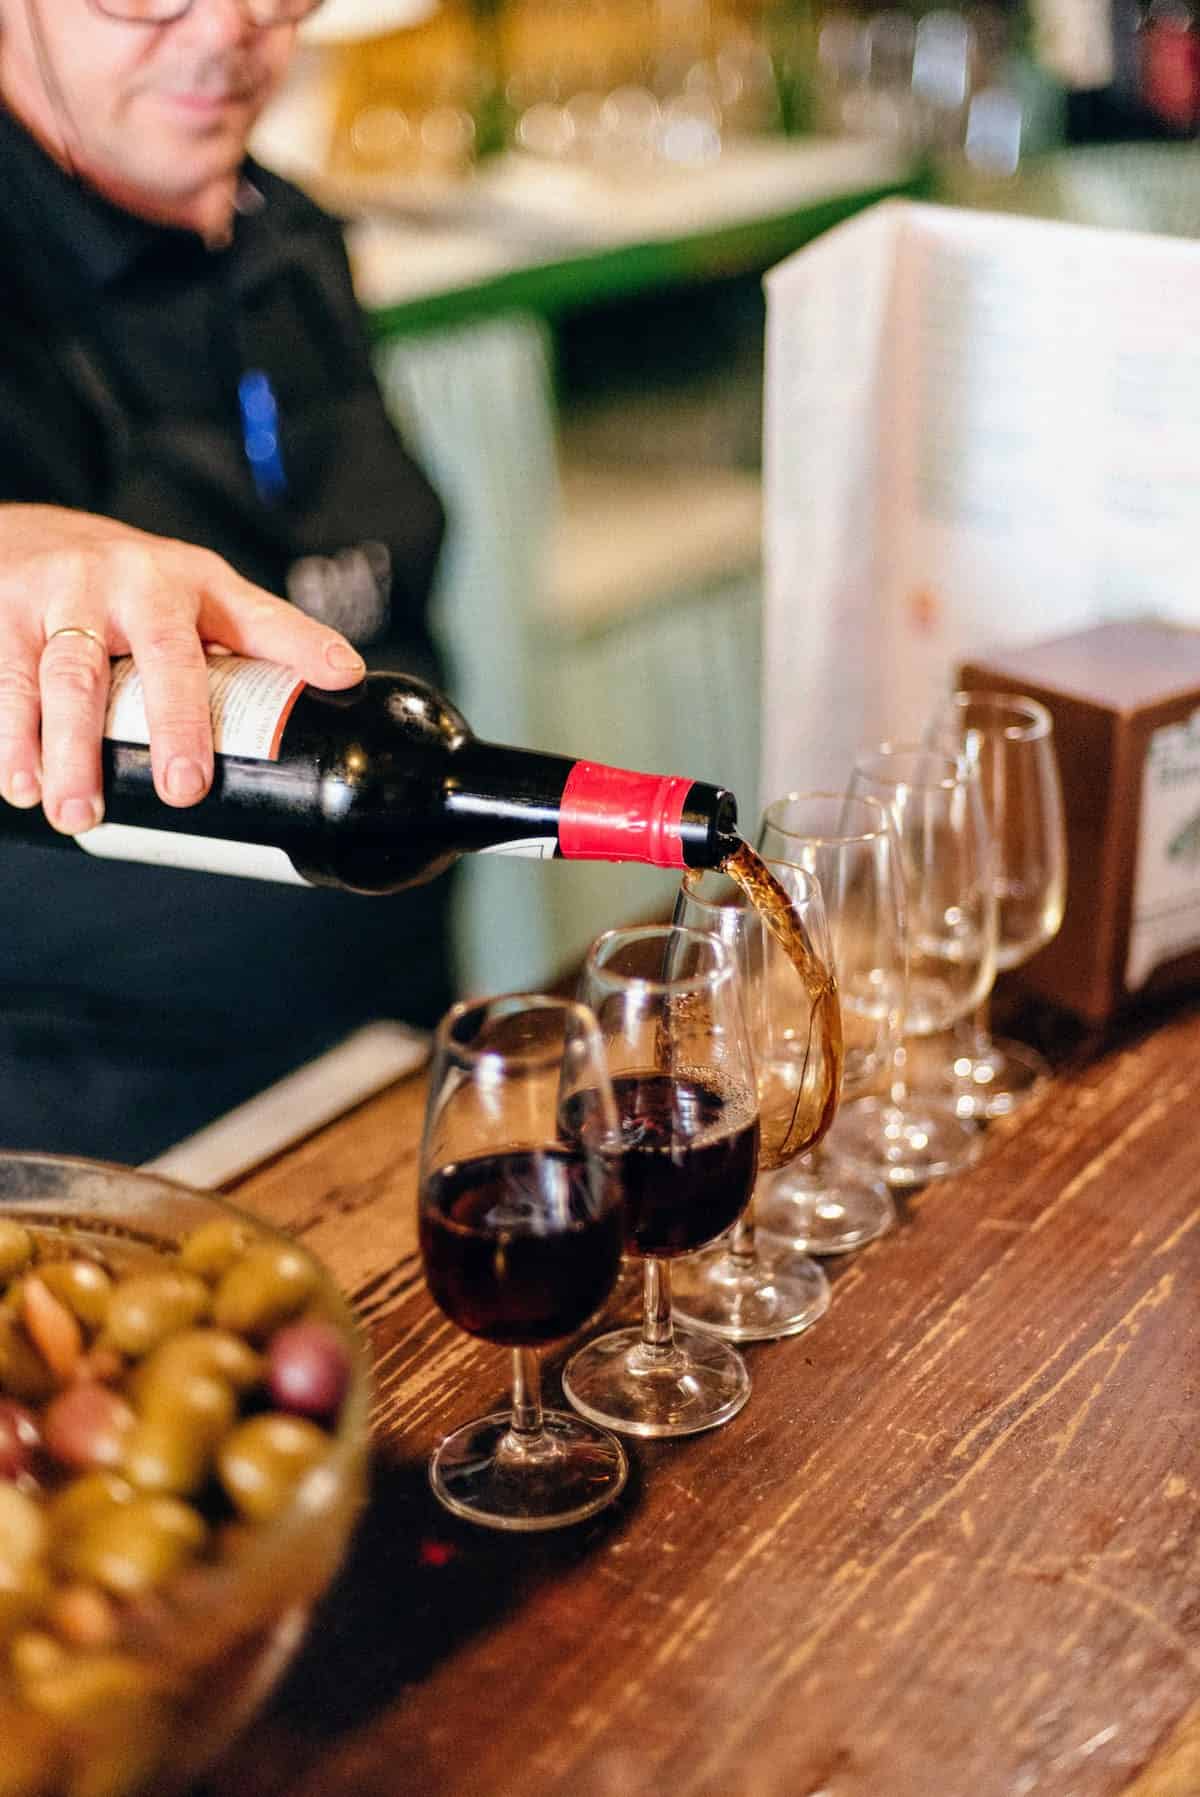 Bartender pouring several glasses of dark brown sherry wine on a wooden bar top